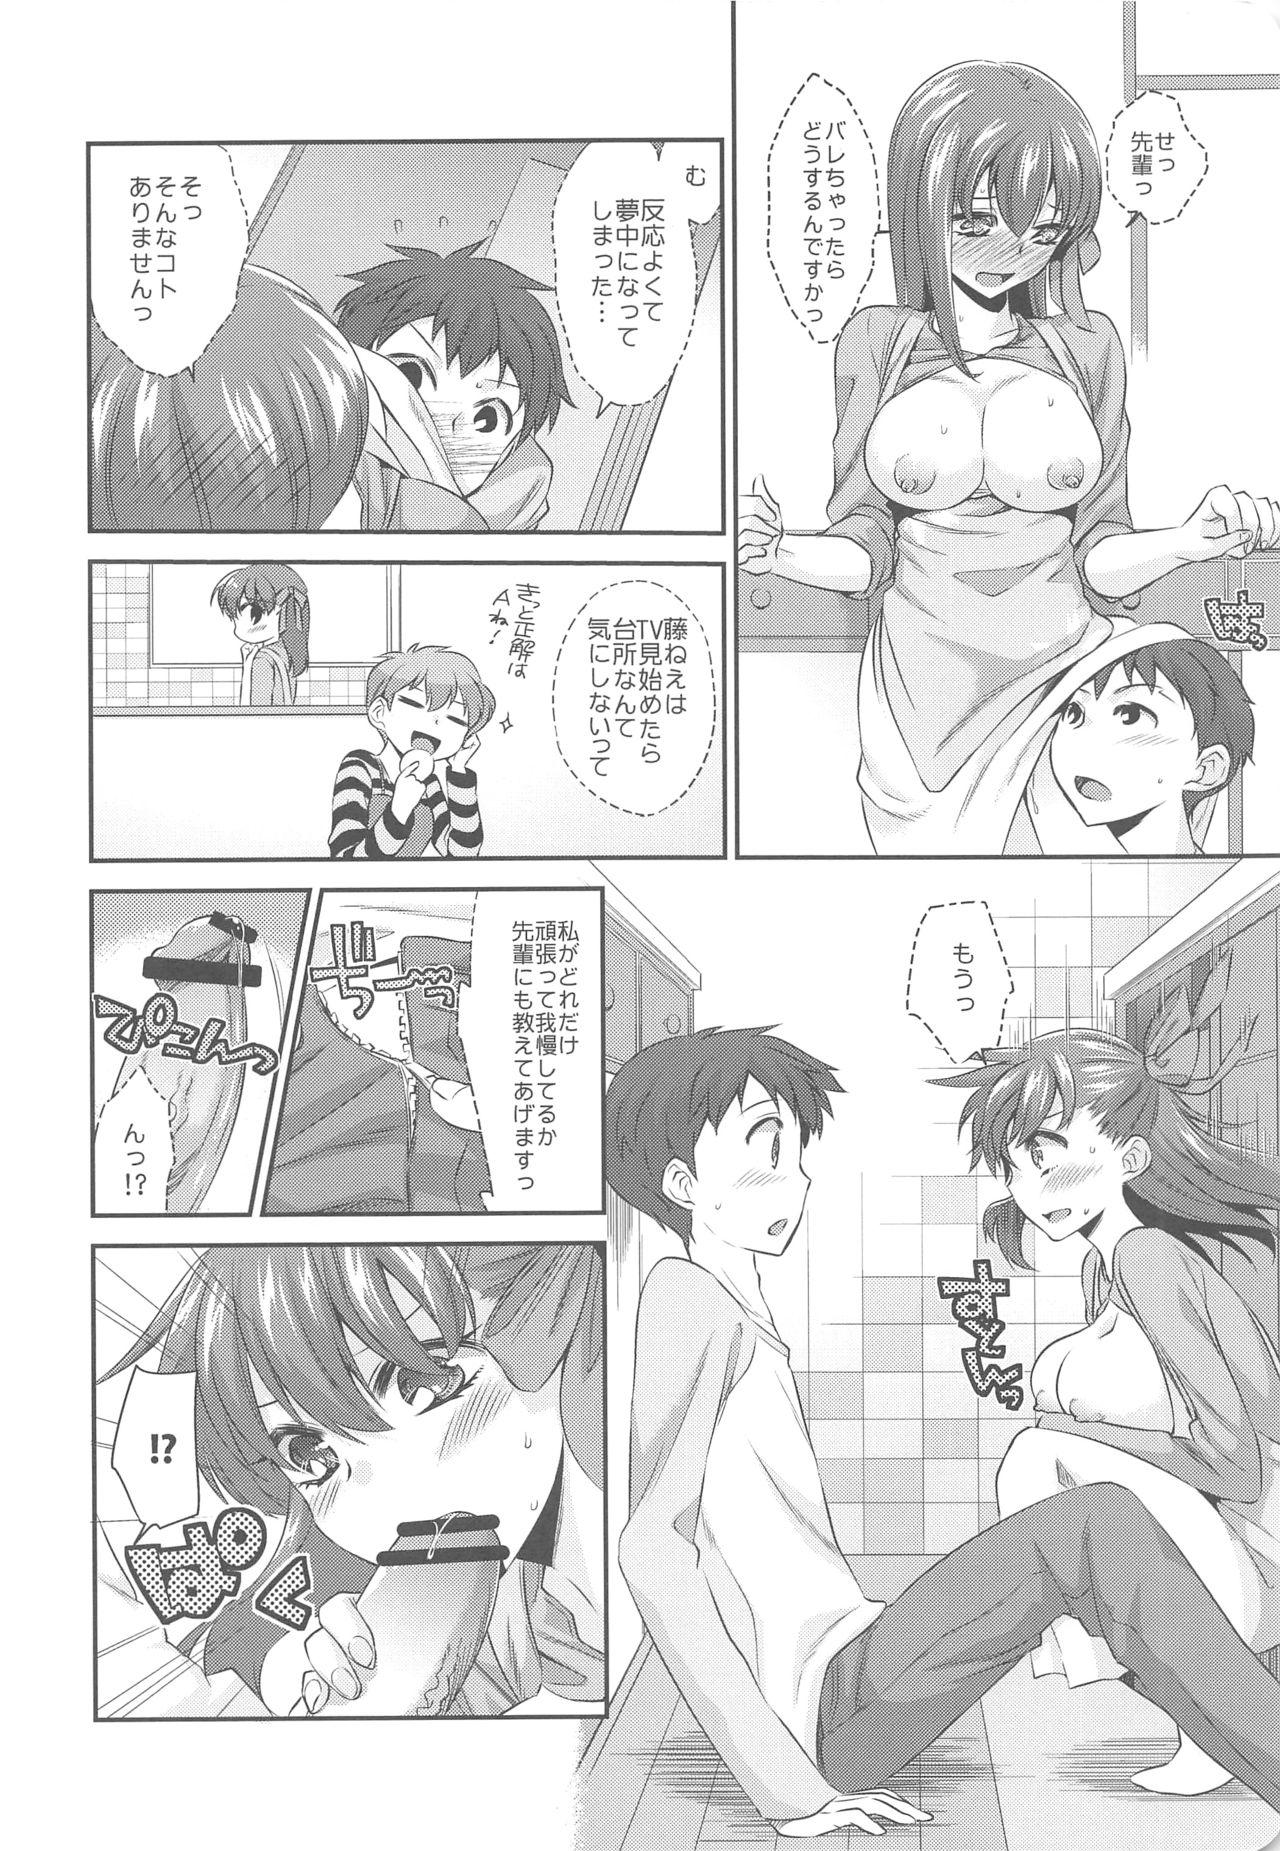 New Kitchen H - Fate stay night Sensual - Page 6